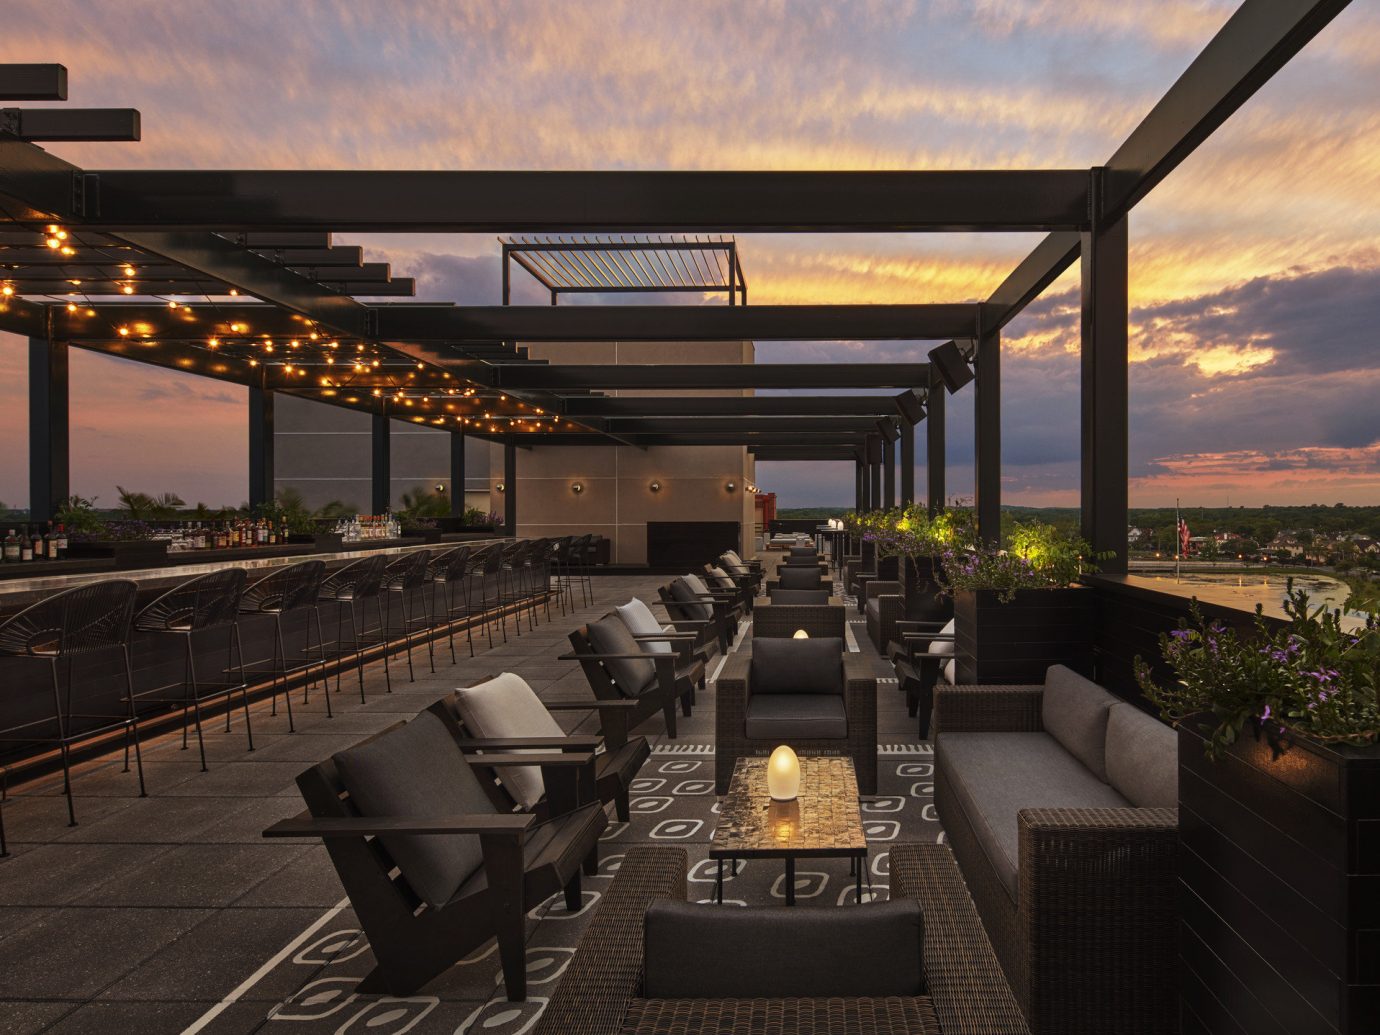 ambient lighting bar seating calm dawn dusk Elegant golden hour Hotels lights lounge chairs Luxury majestic night lights orange sky outdoor lounge regal remote Rooftop serene Solo Travel sophisticated Sunset view sky outdoor bridge lighting evening estate interior design